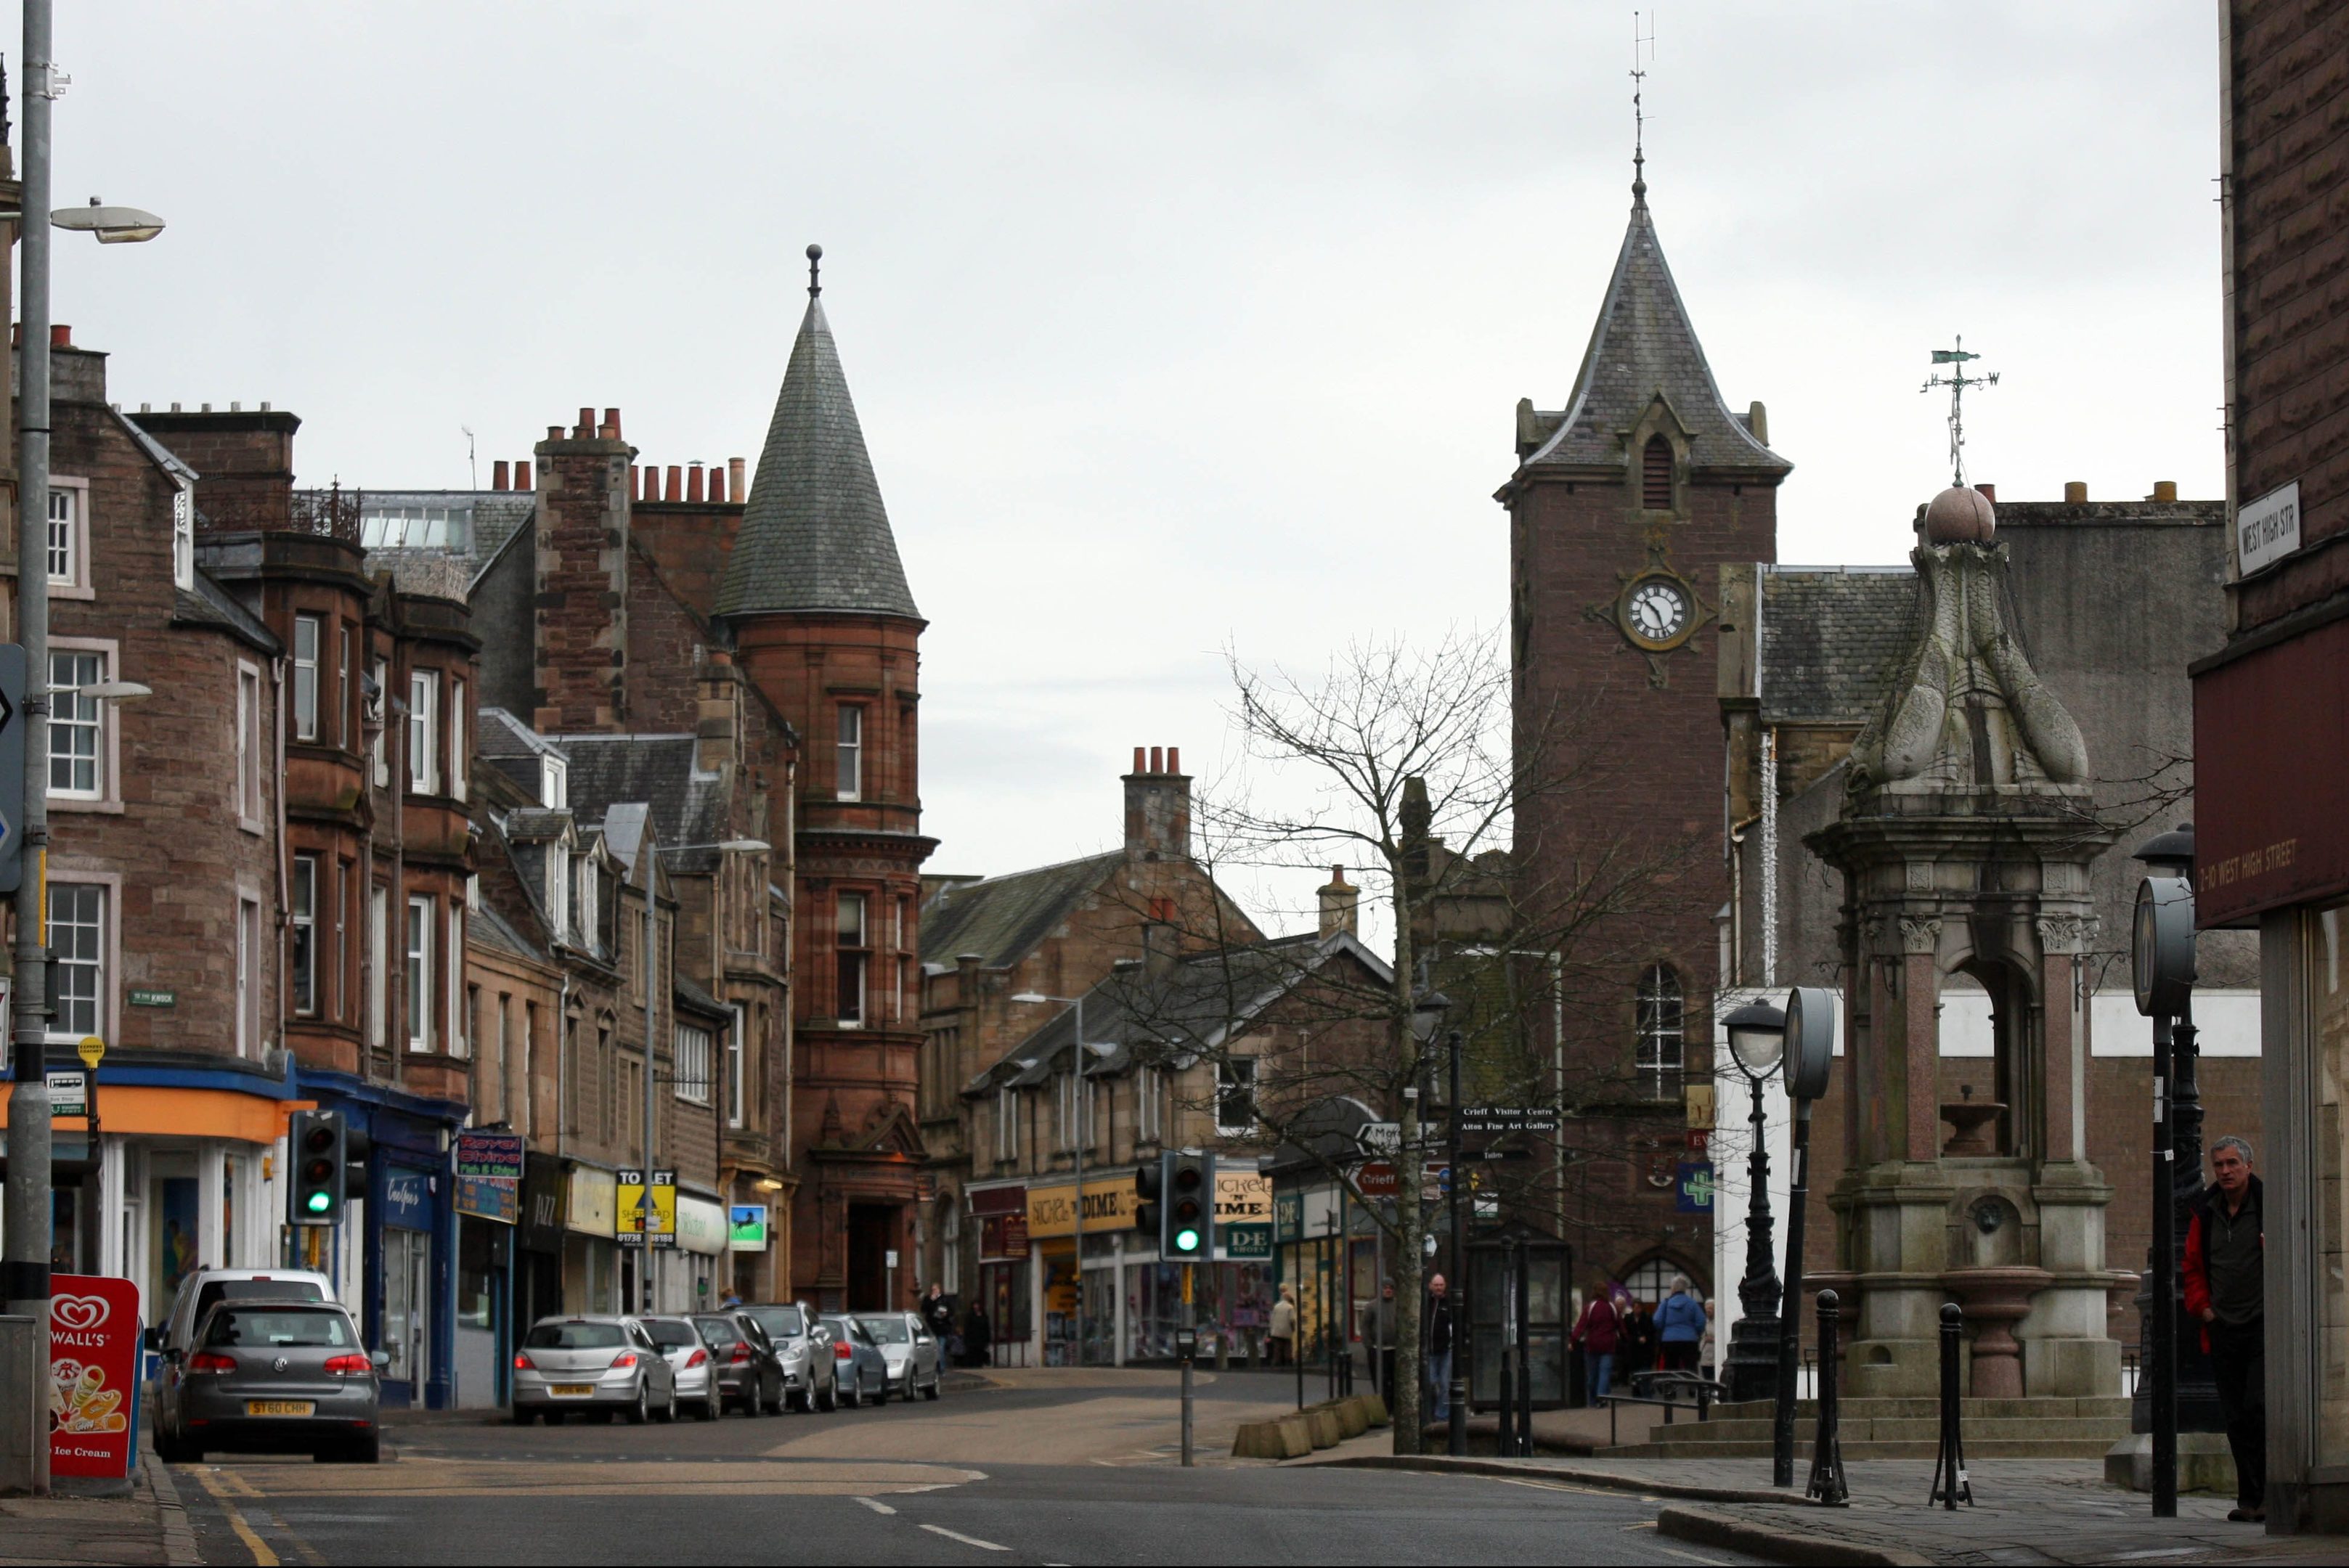 Businesses in Crieff have claimed new High Street parking rules have hit their trade.